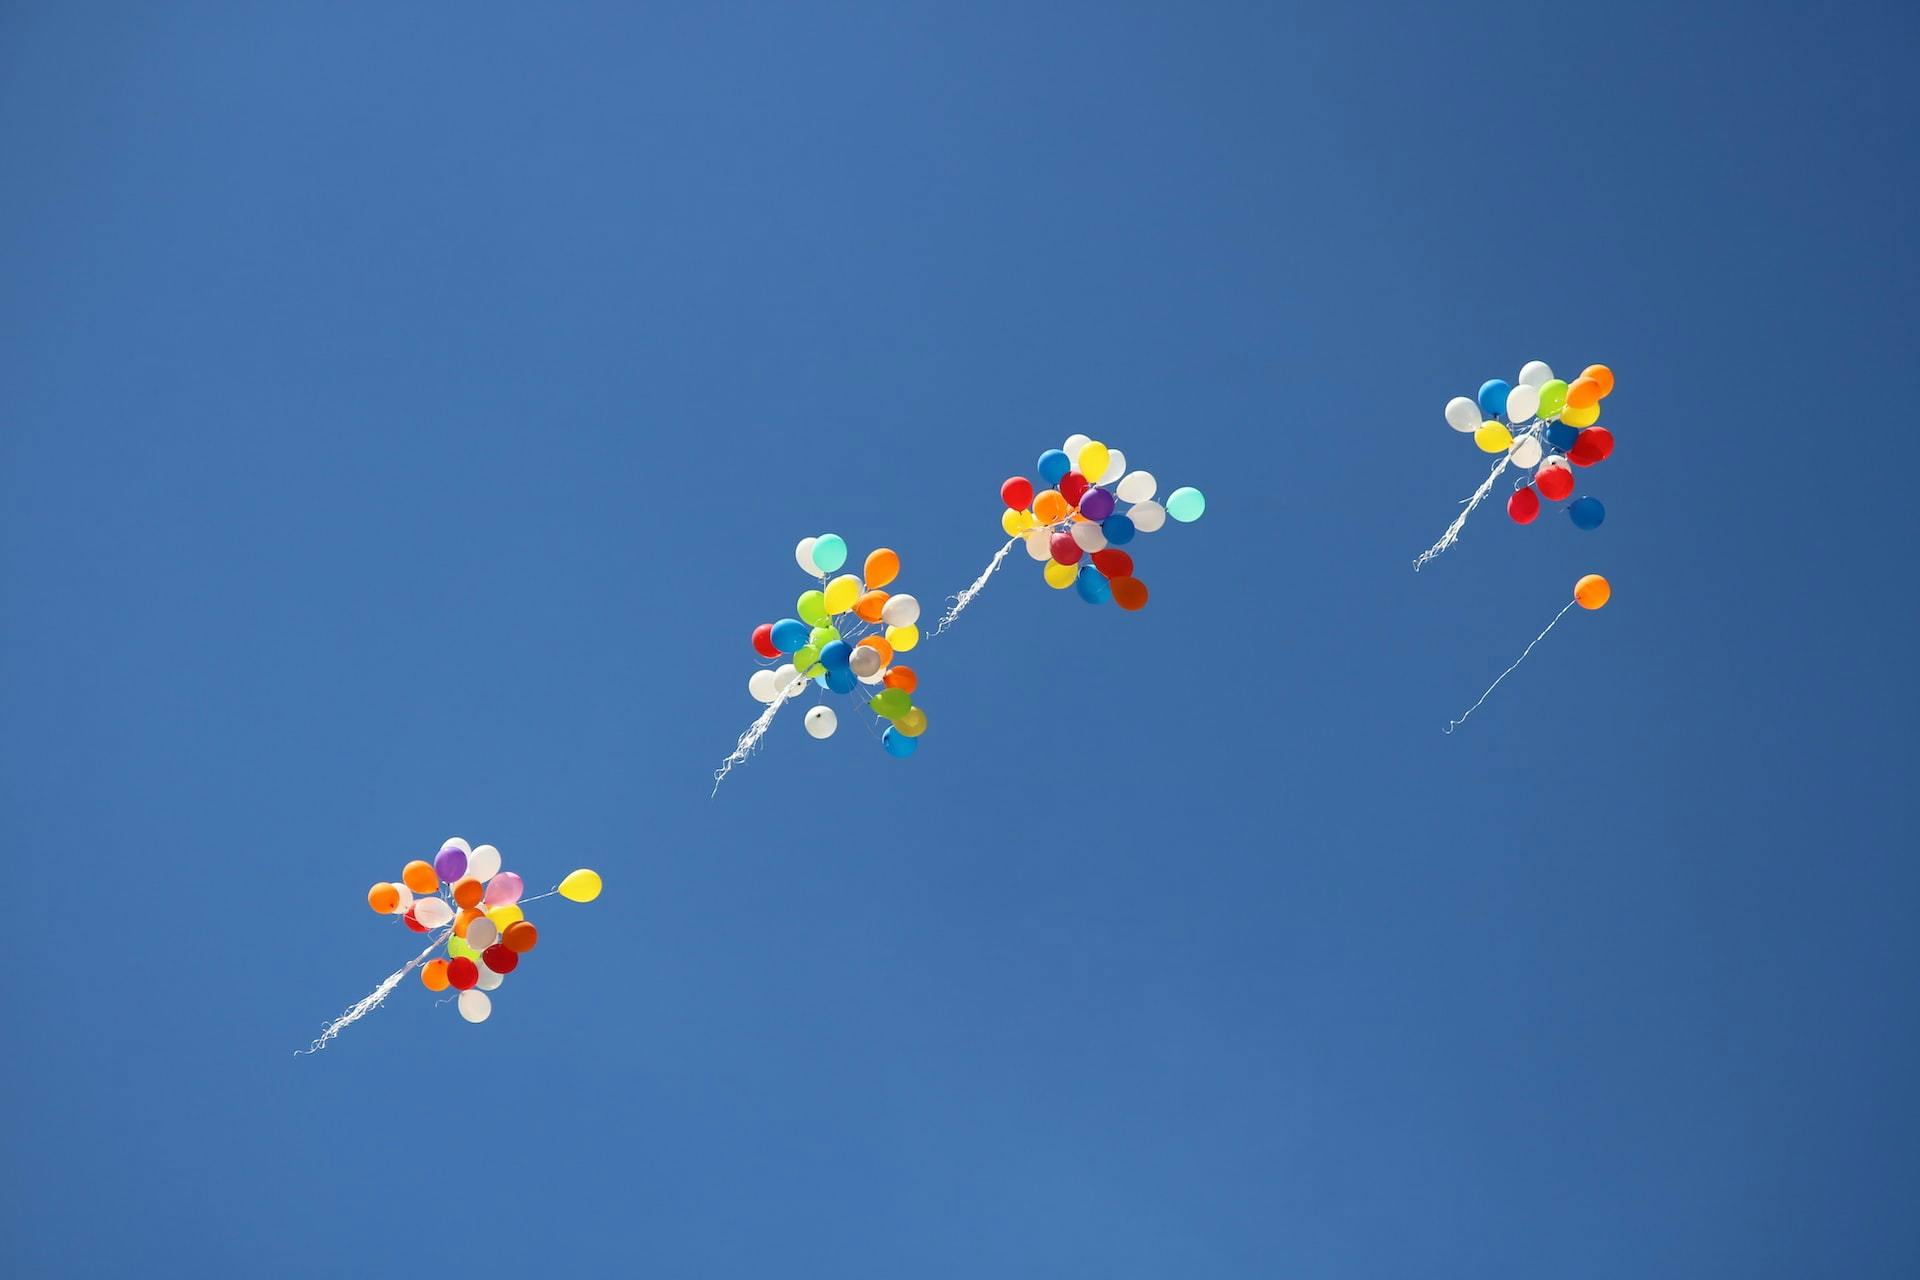 Image of balloons floating away in the air